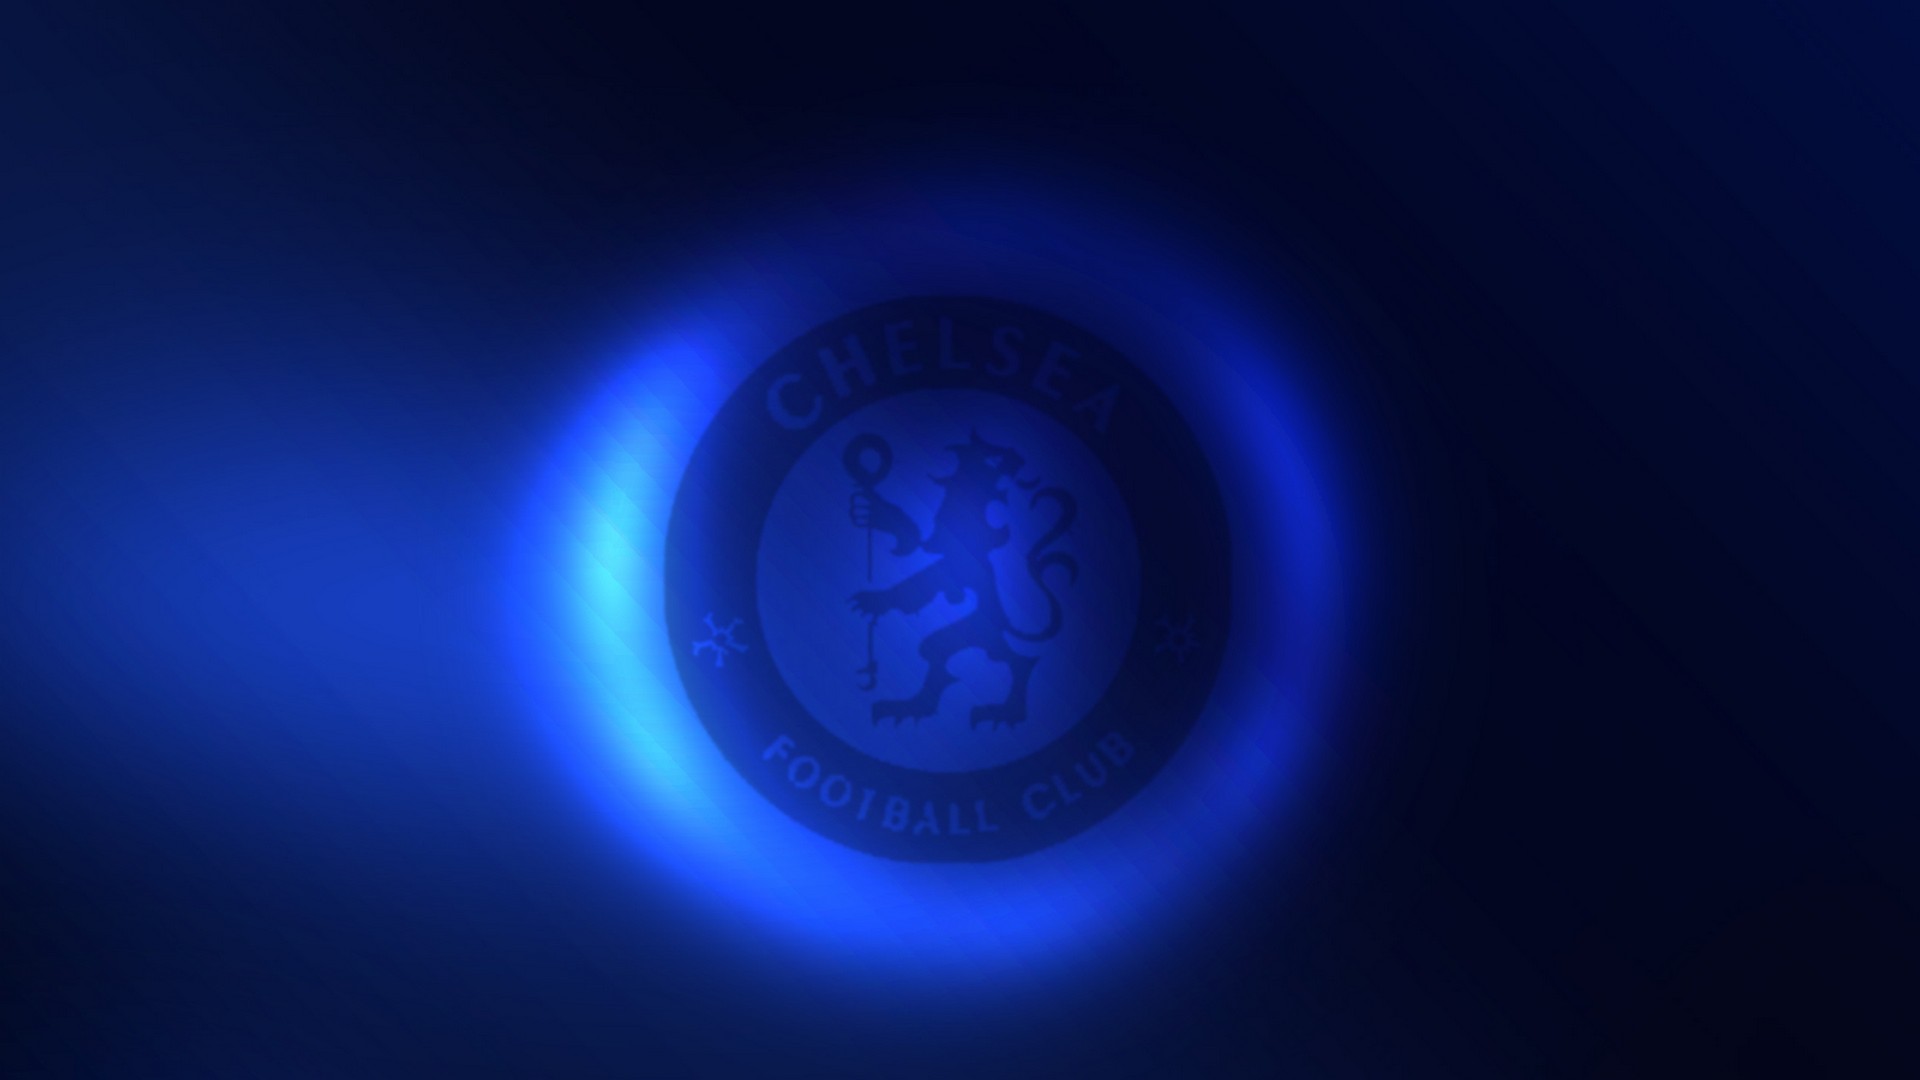 HD Chelsea Wallpapers With high-resolution 1920X1080 pixel. You can use this wallpaper for your Desktop Computers, Mac Screensavers, Windows Backgrounds, iPhone Wallpapers, Tablet or Android Lock screen and another Mobile device